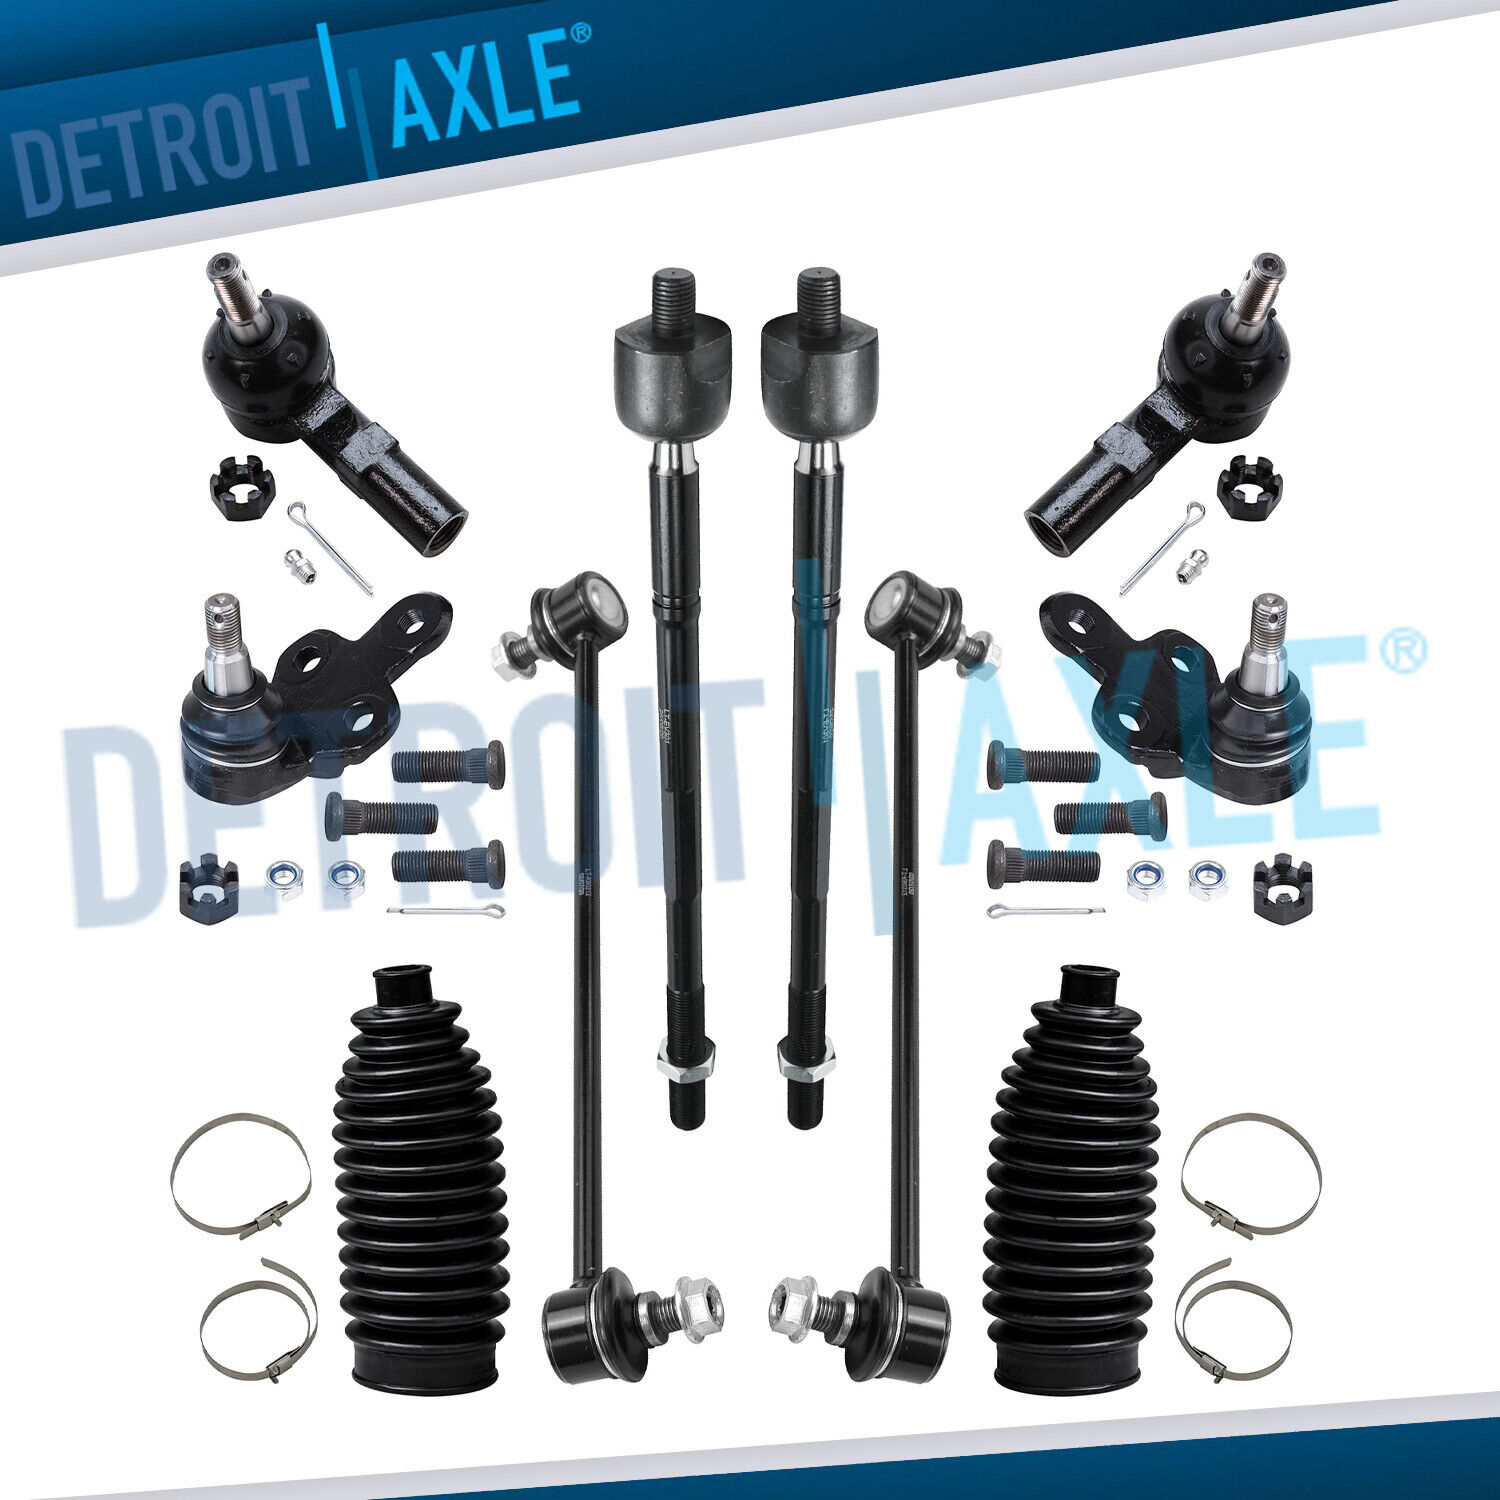 Lower Ball Joints Tie Rods Sway Bar Links for Lexus ES300 Toyota Avalon Camry